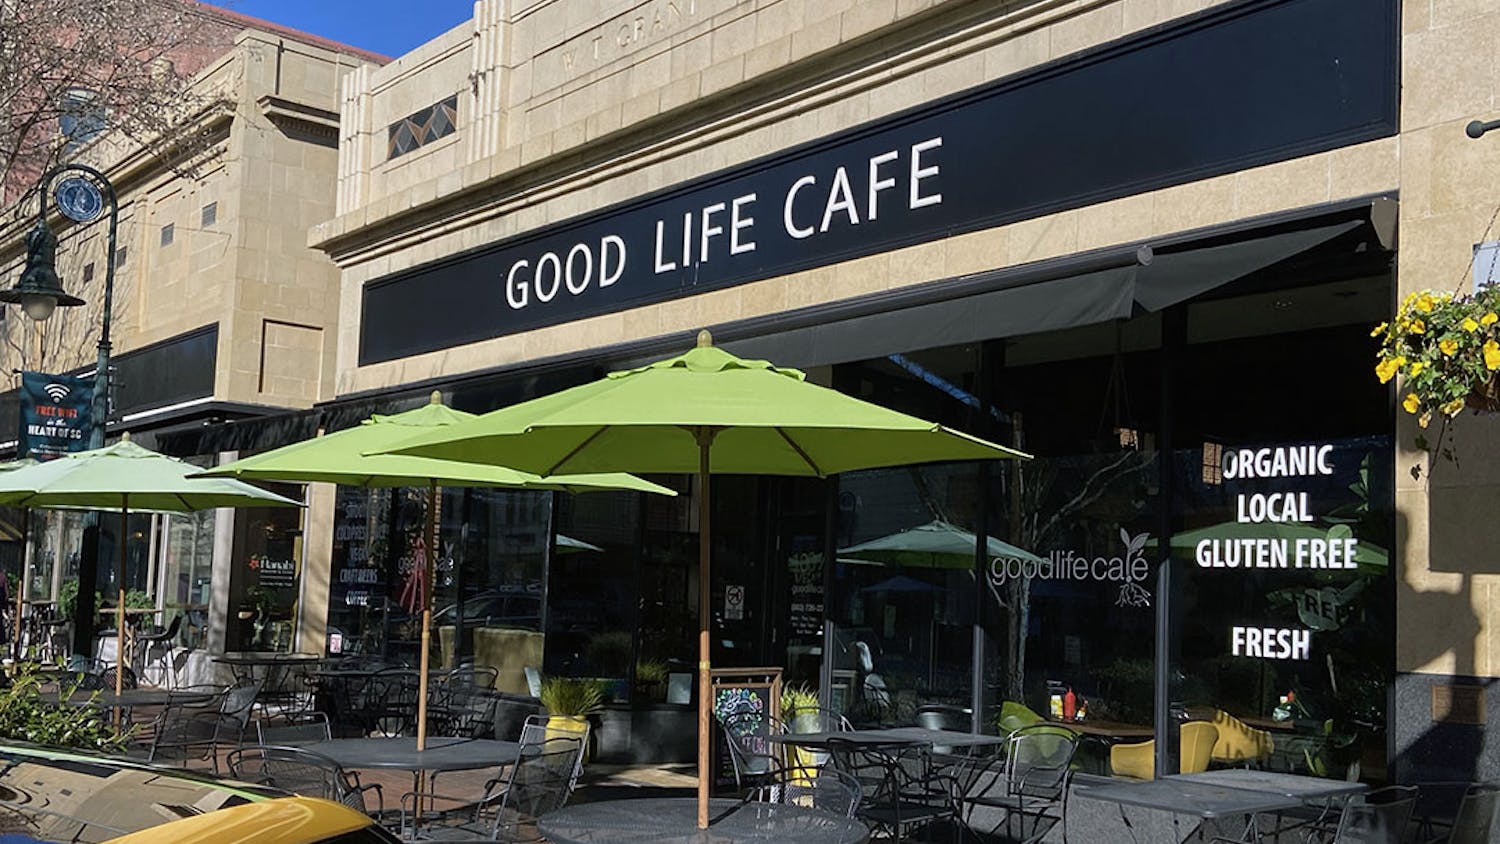 Good Life Cafe, located on Main Street, is a great healthy food option. It serves vegan-friendly dishes along with in-house coffee and cocktails.&nbsp;